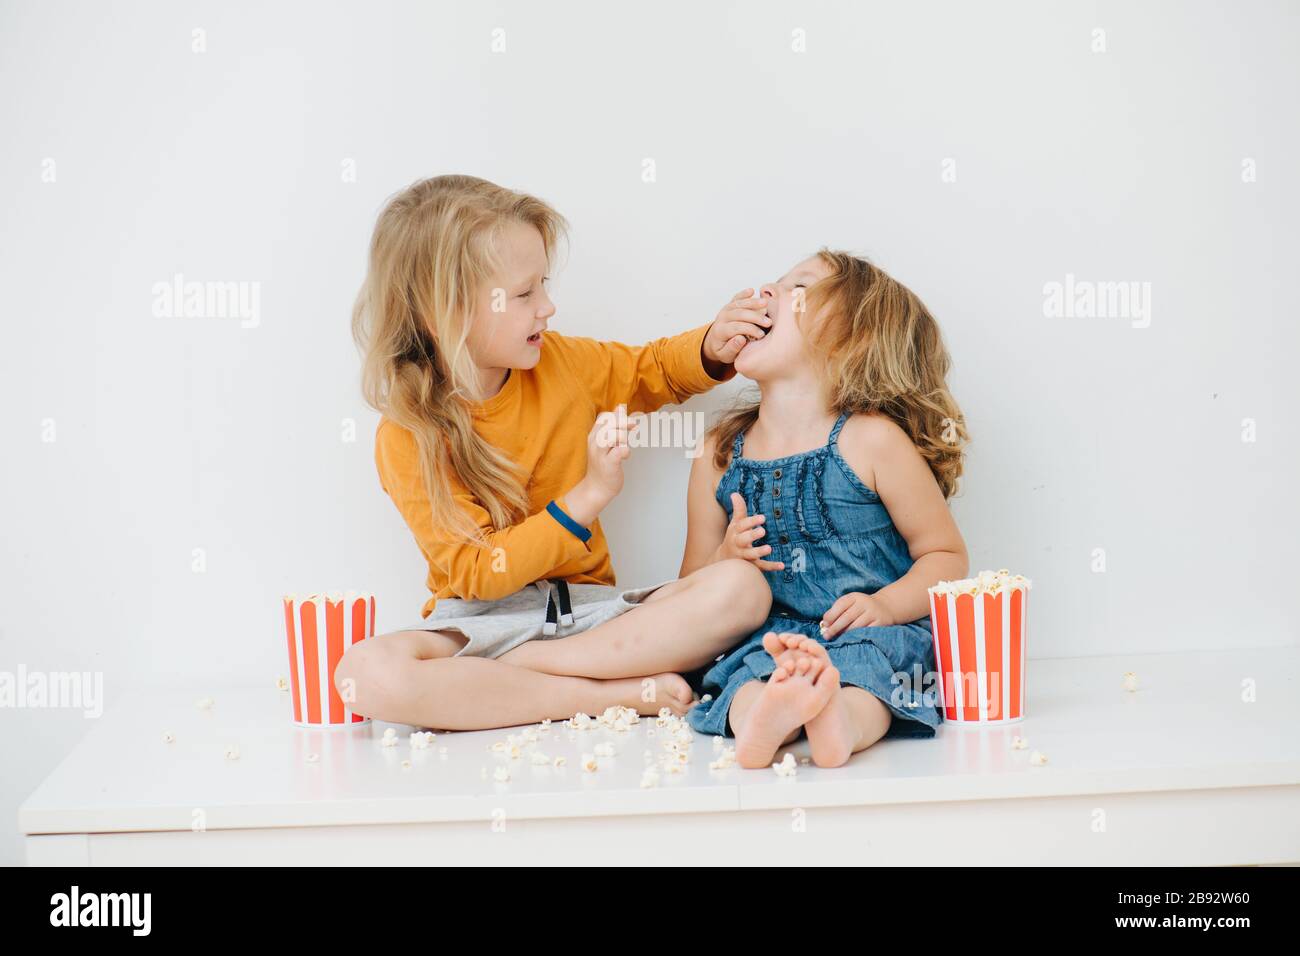 Sibling have fun feeding each other popcorn Stock Photo